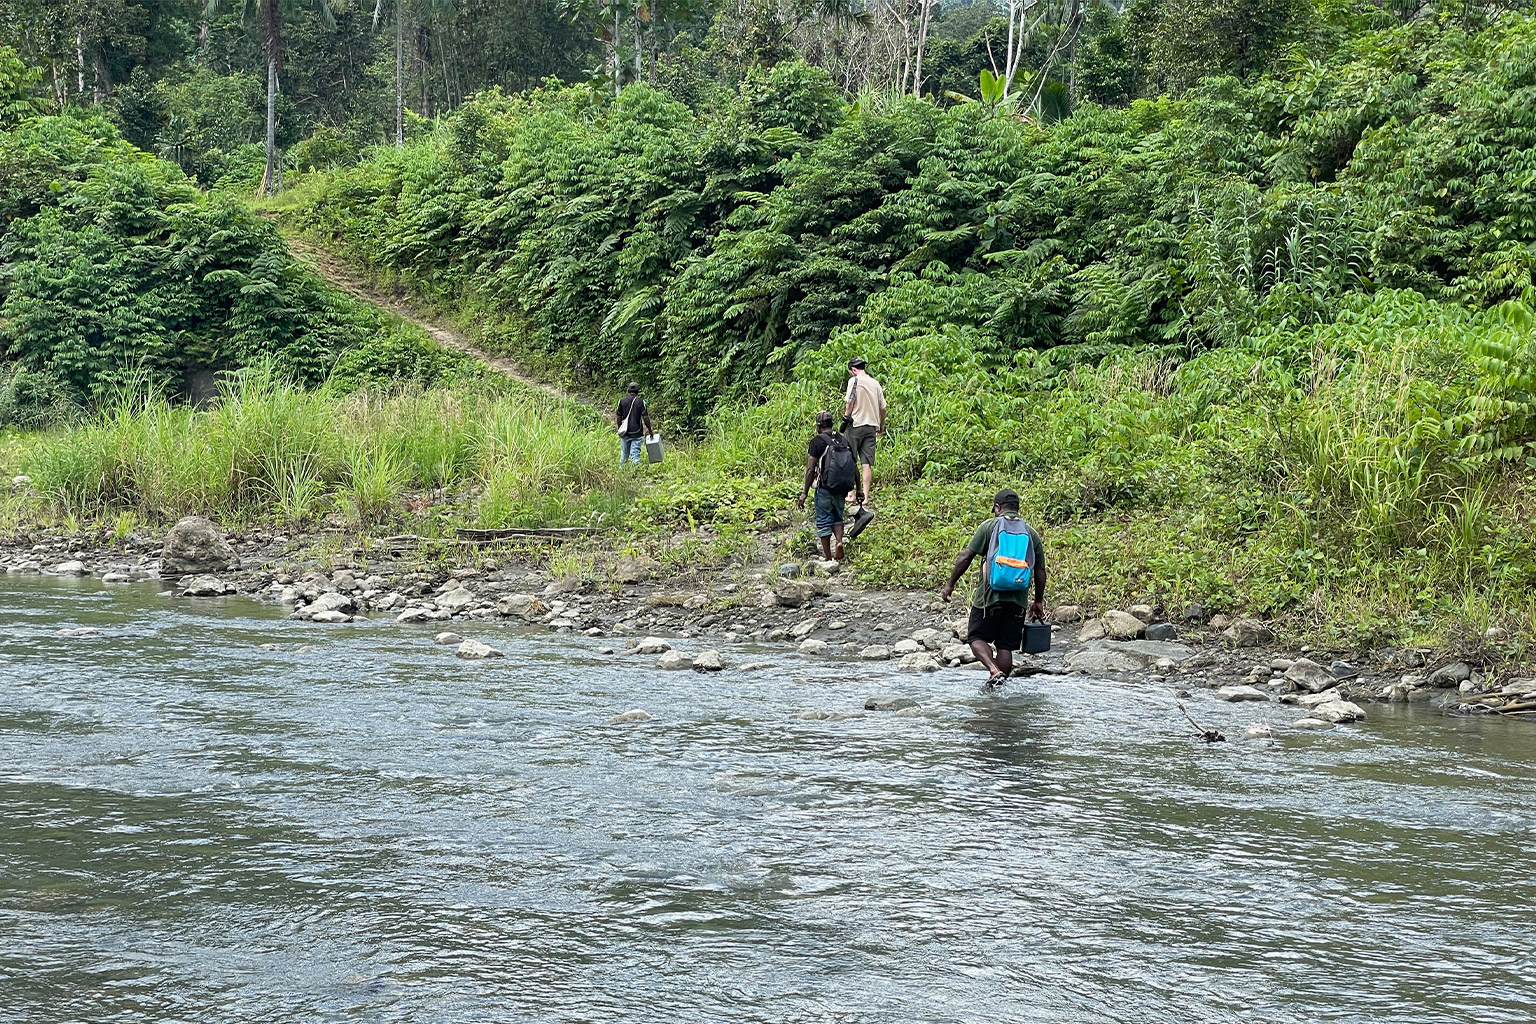 A river crossing on the way to Wuguble.